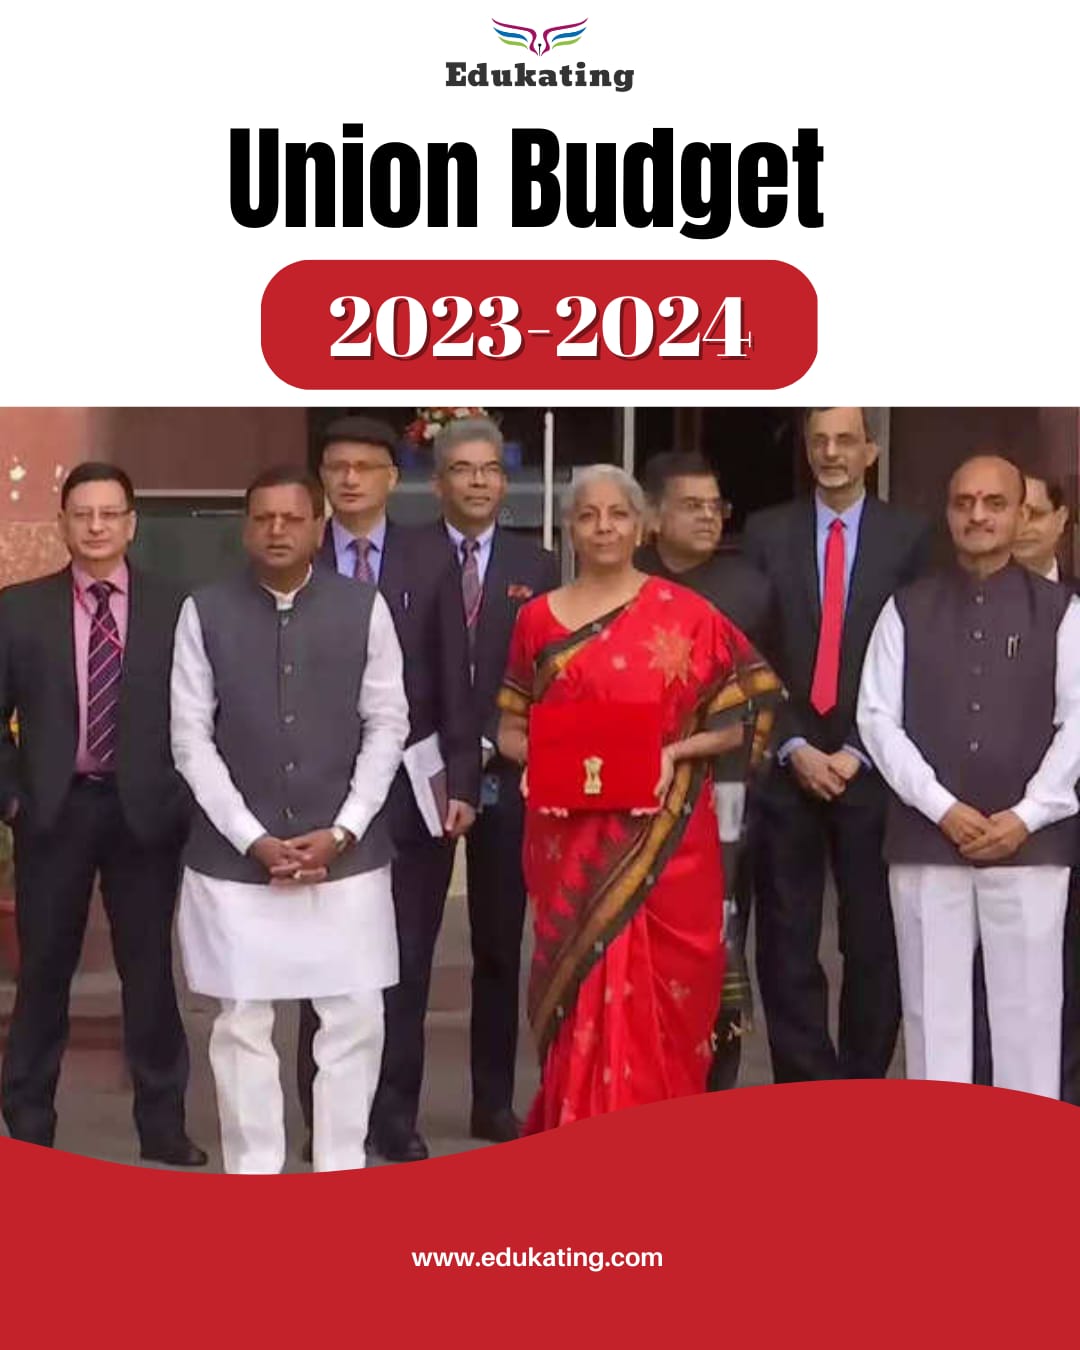 Key Highlights of the Union Budget 2023-24